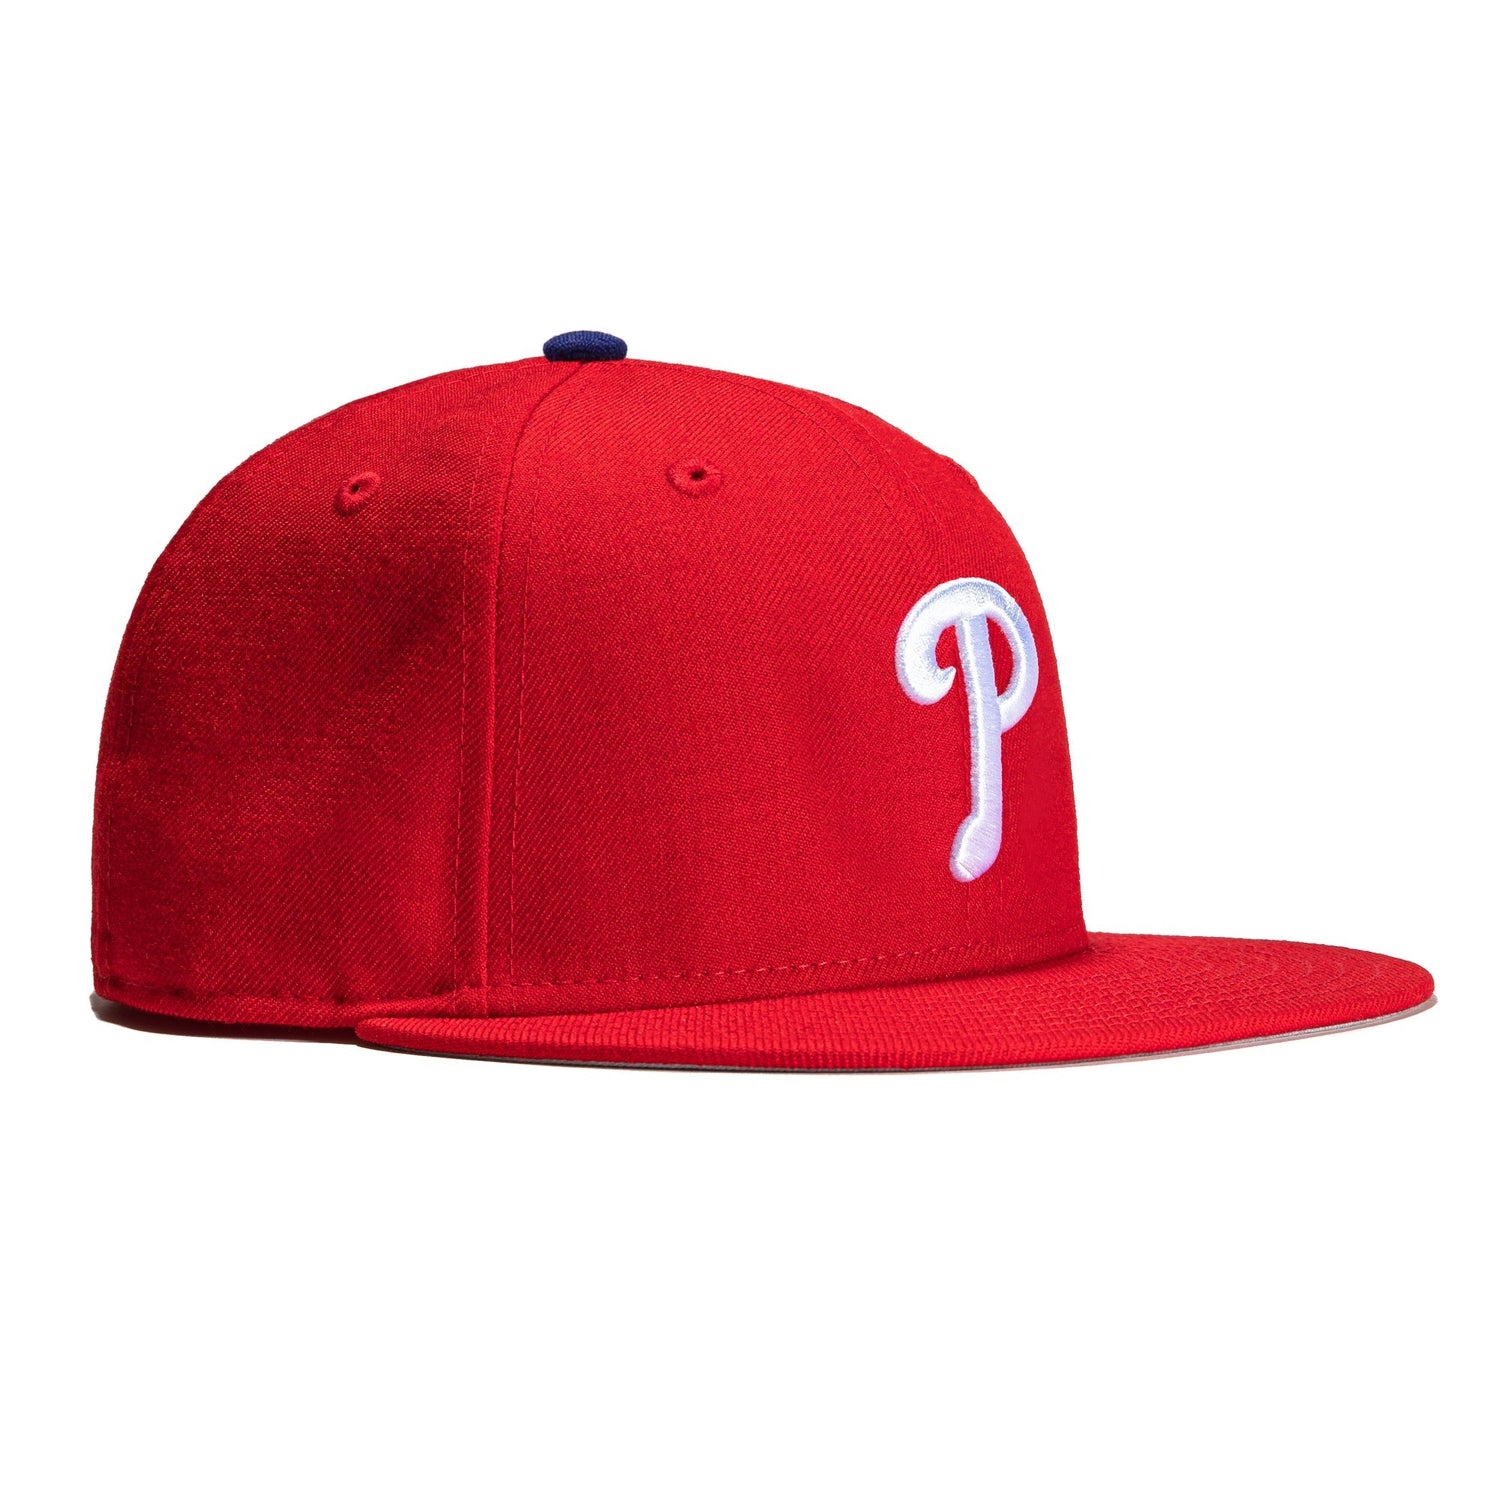 phillies hat red